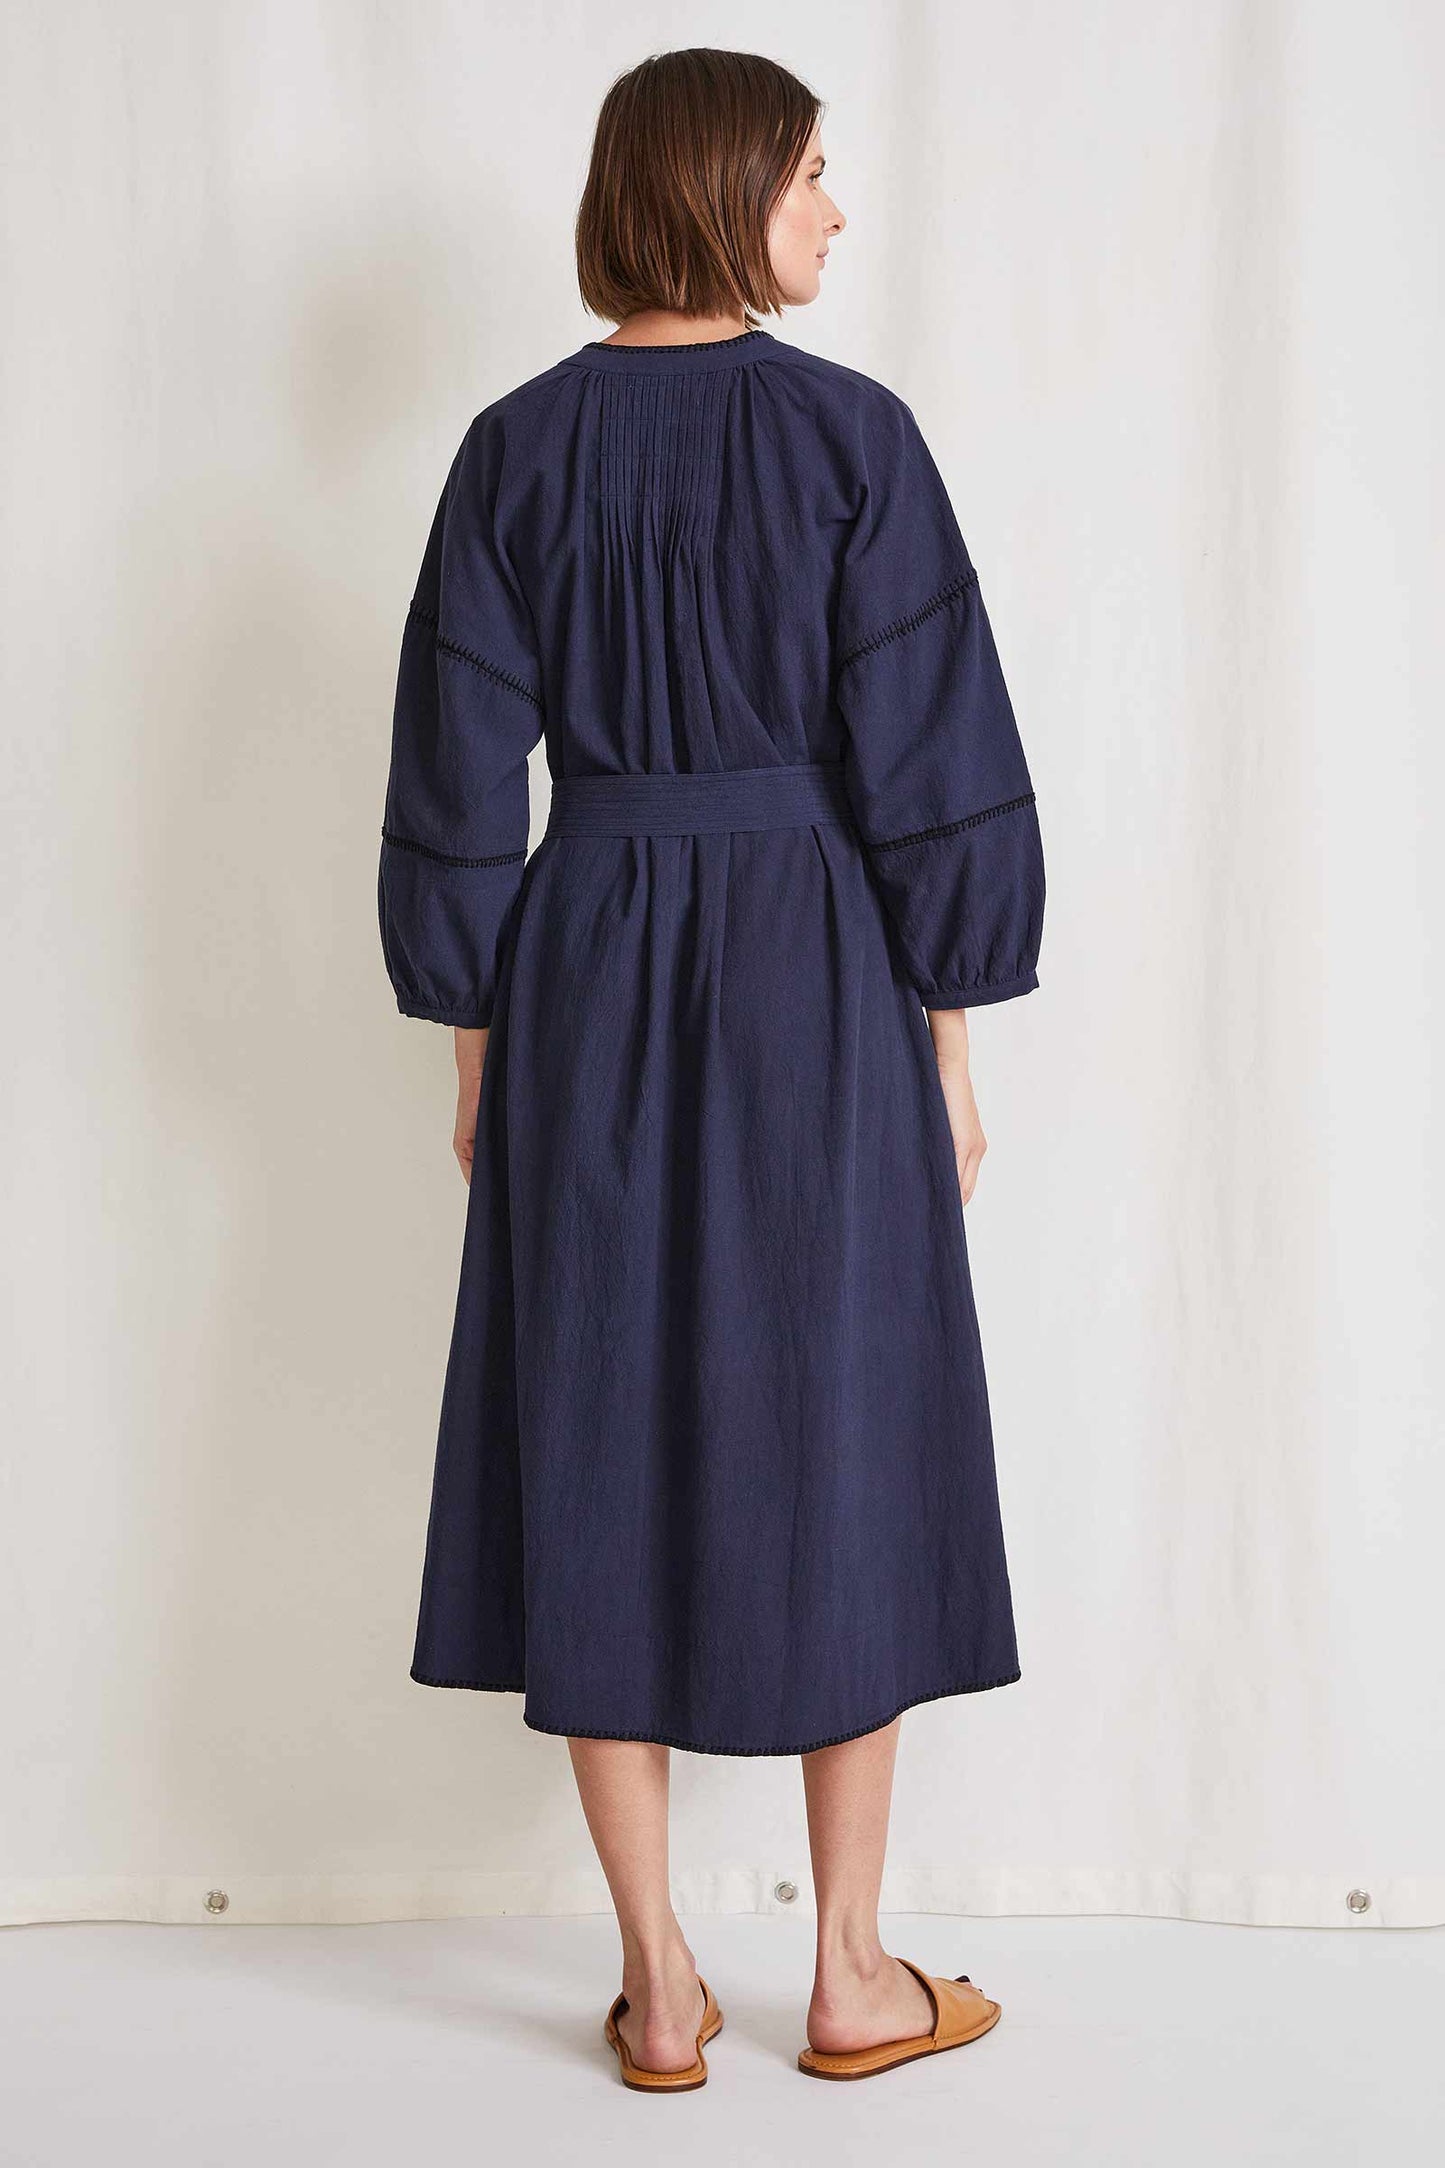 A gorgeous navy blue dress with long sleeves, mid length, fabric belts. The most beautiful edge detail, handmade in India. Sophisticated and casual this is the most wearable dress in the finest material we have in stock, you wont be disappointed.